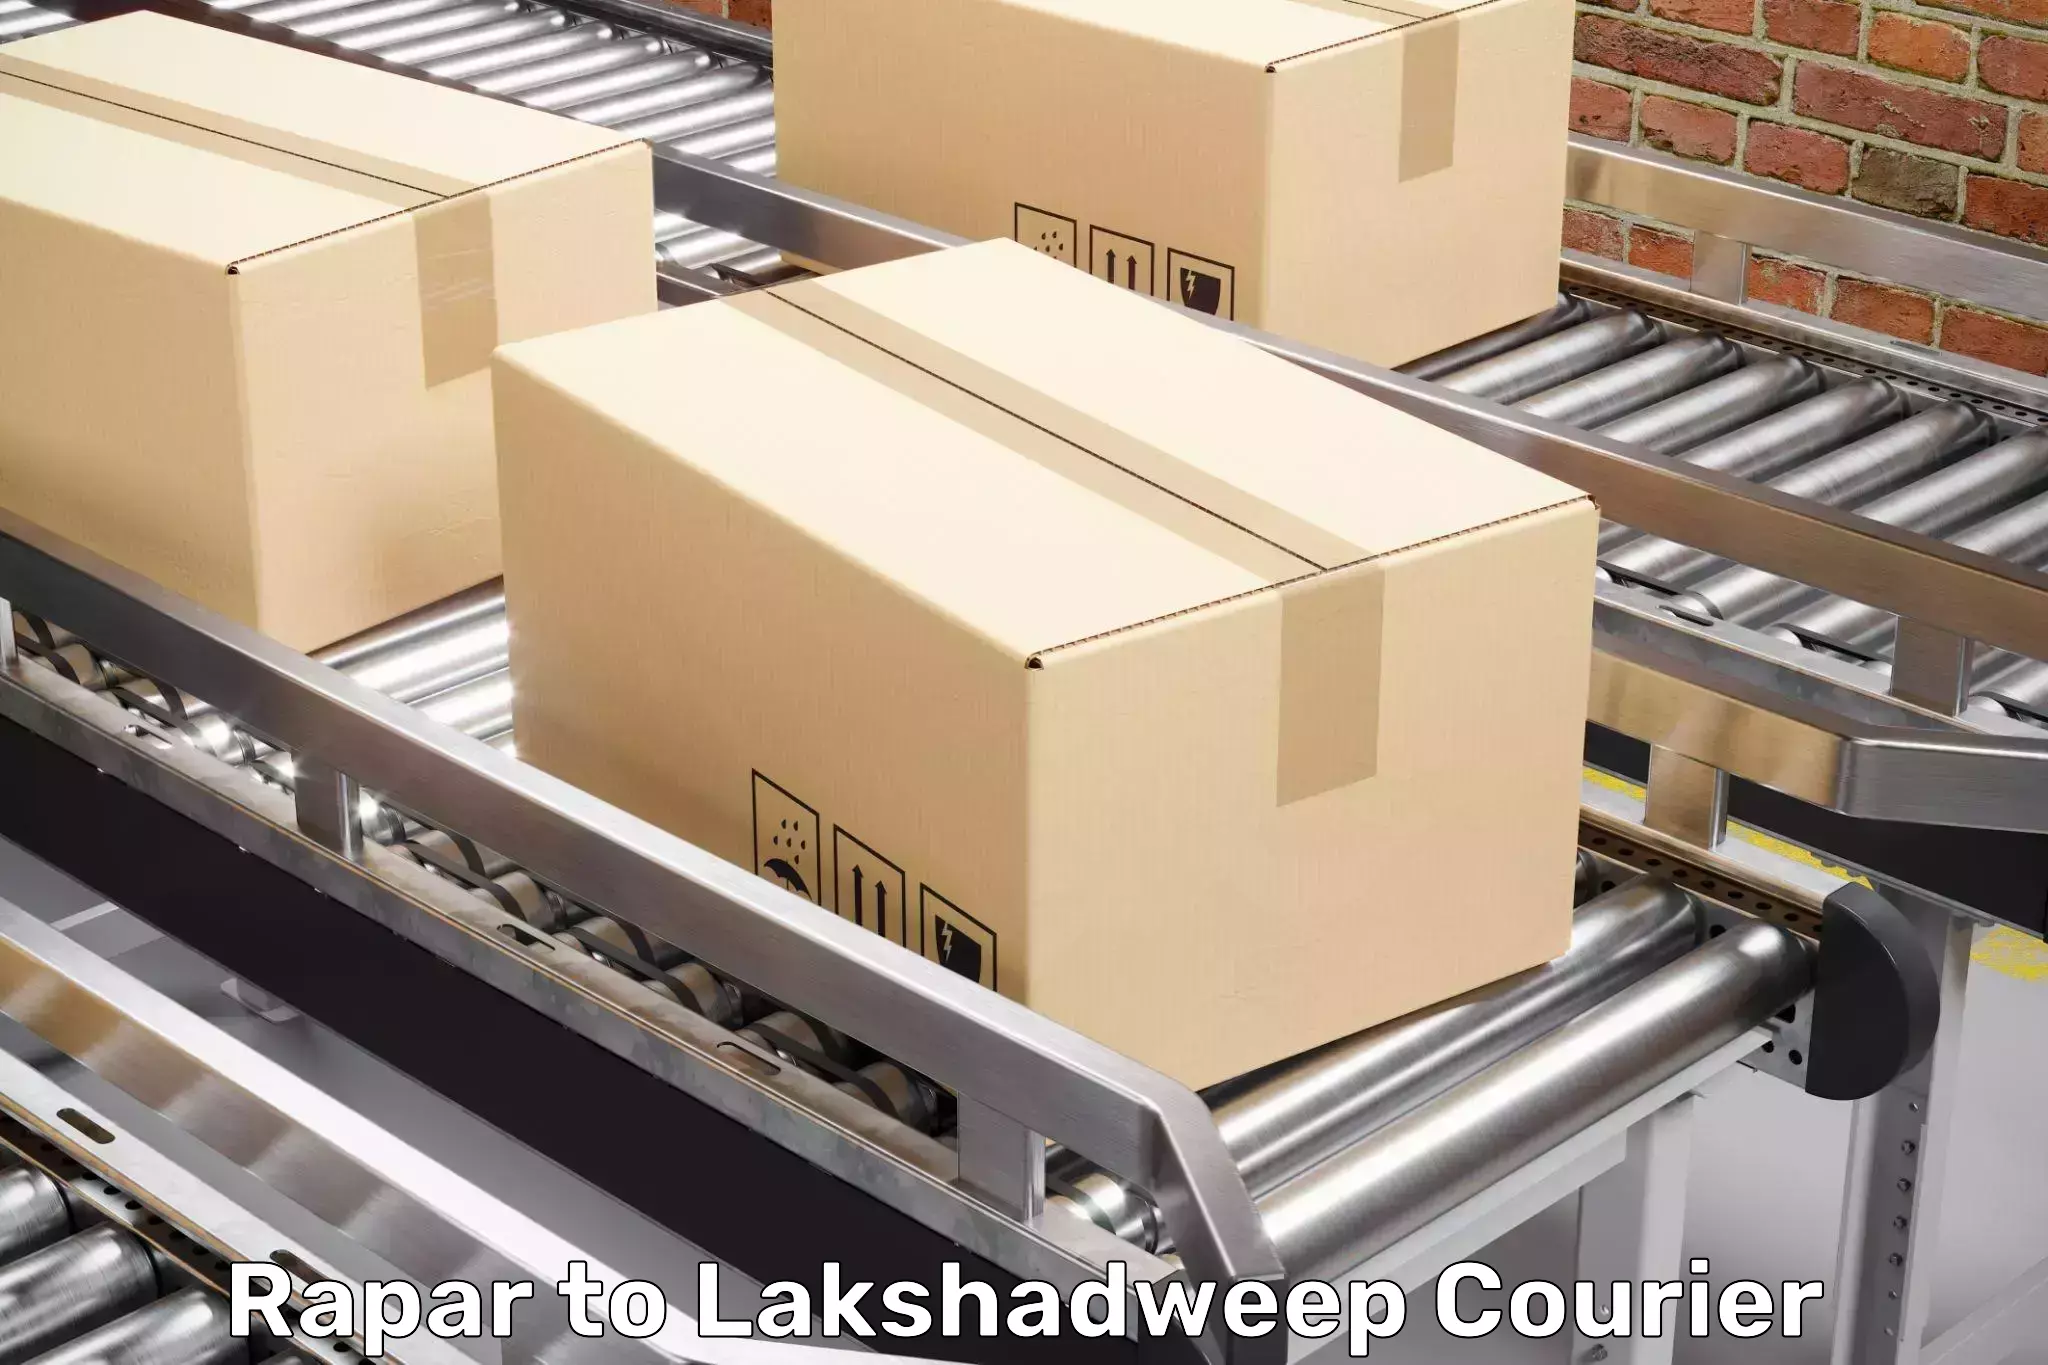 Professional moving assistance in Rapar to Lakshadweep